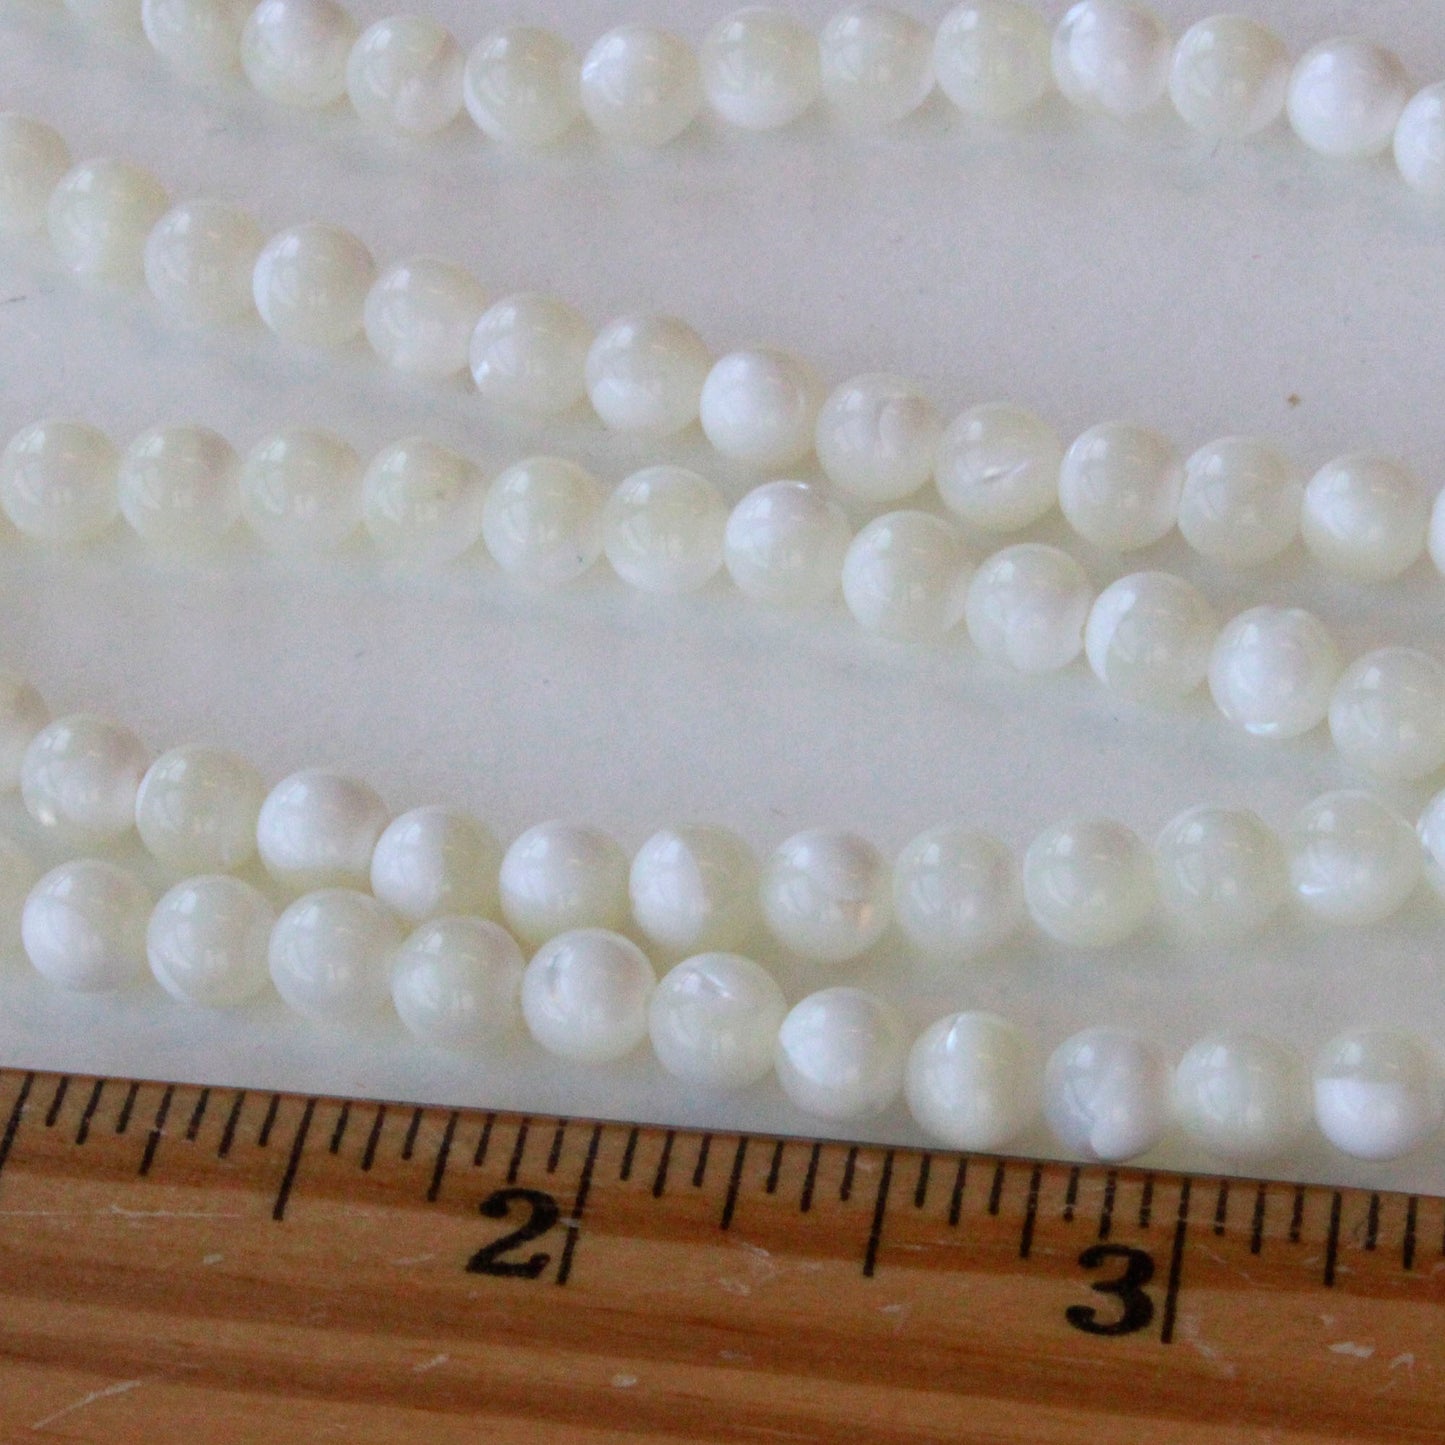 6mm Round Mother of Pearl - 16 inches